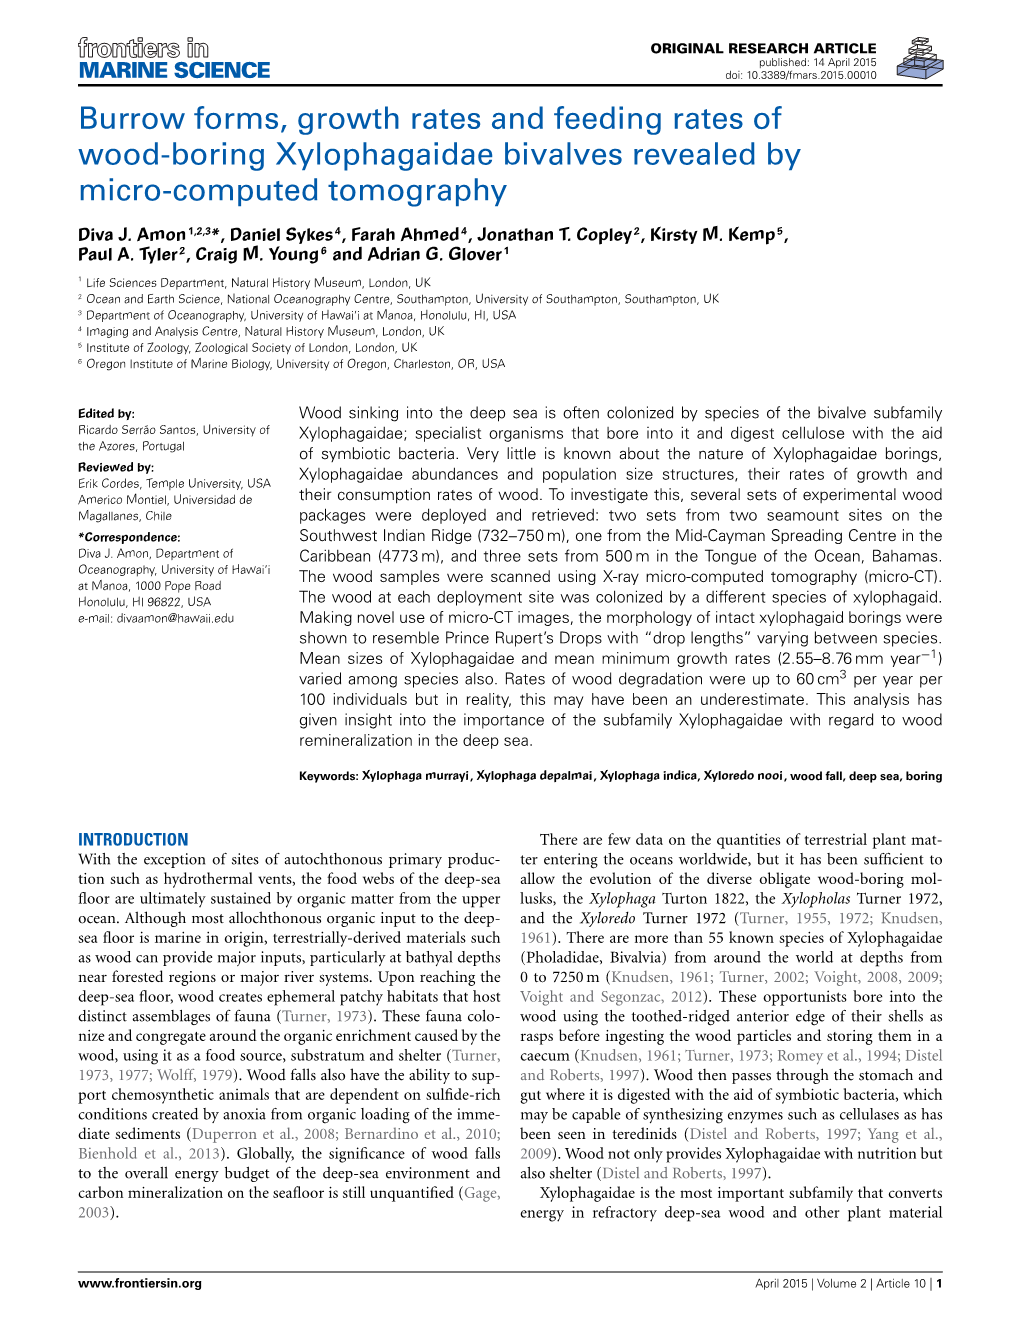 Burrow Forms, Growth Rates and Feeding Rates of Wood-Boring Xylophagaidae Bivalves Revealed by Micro-Computed Tomography